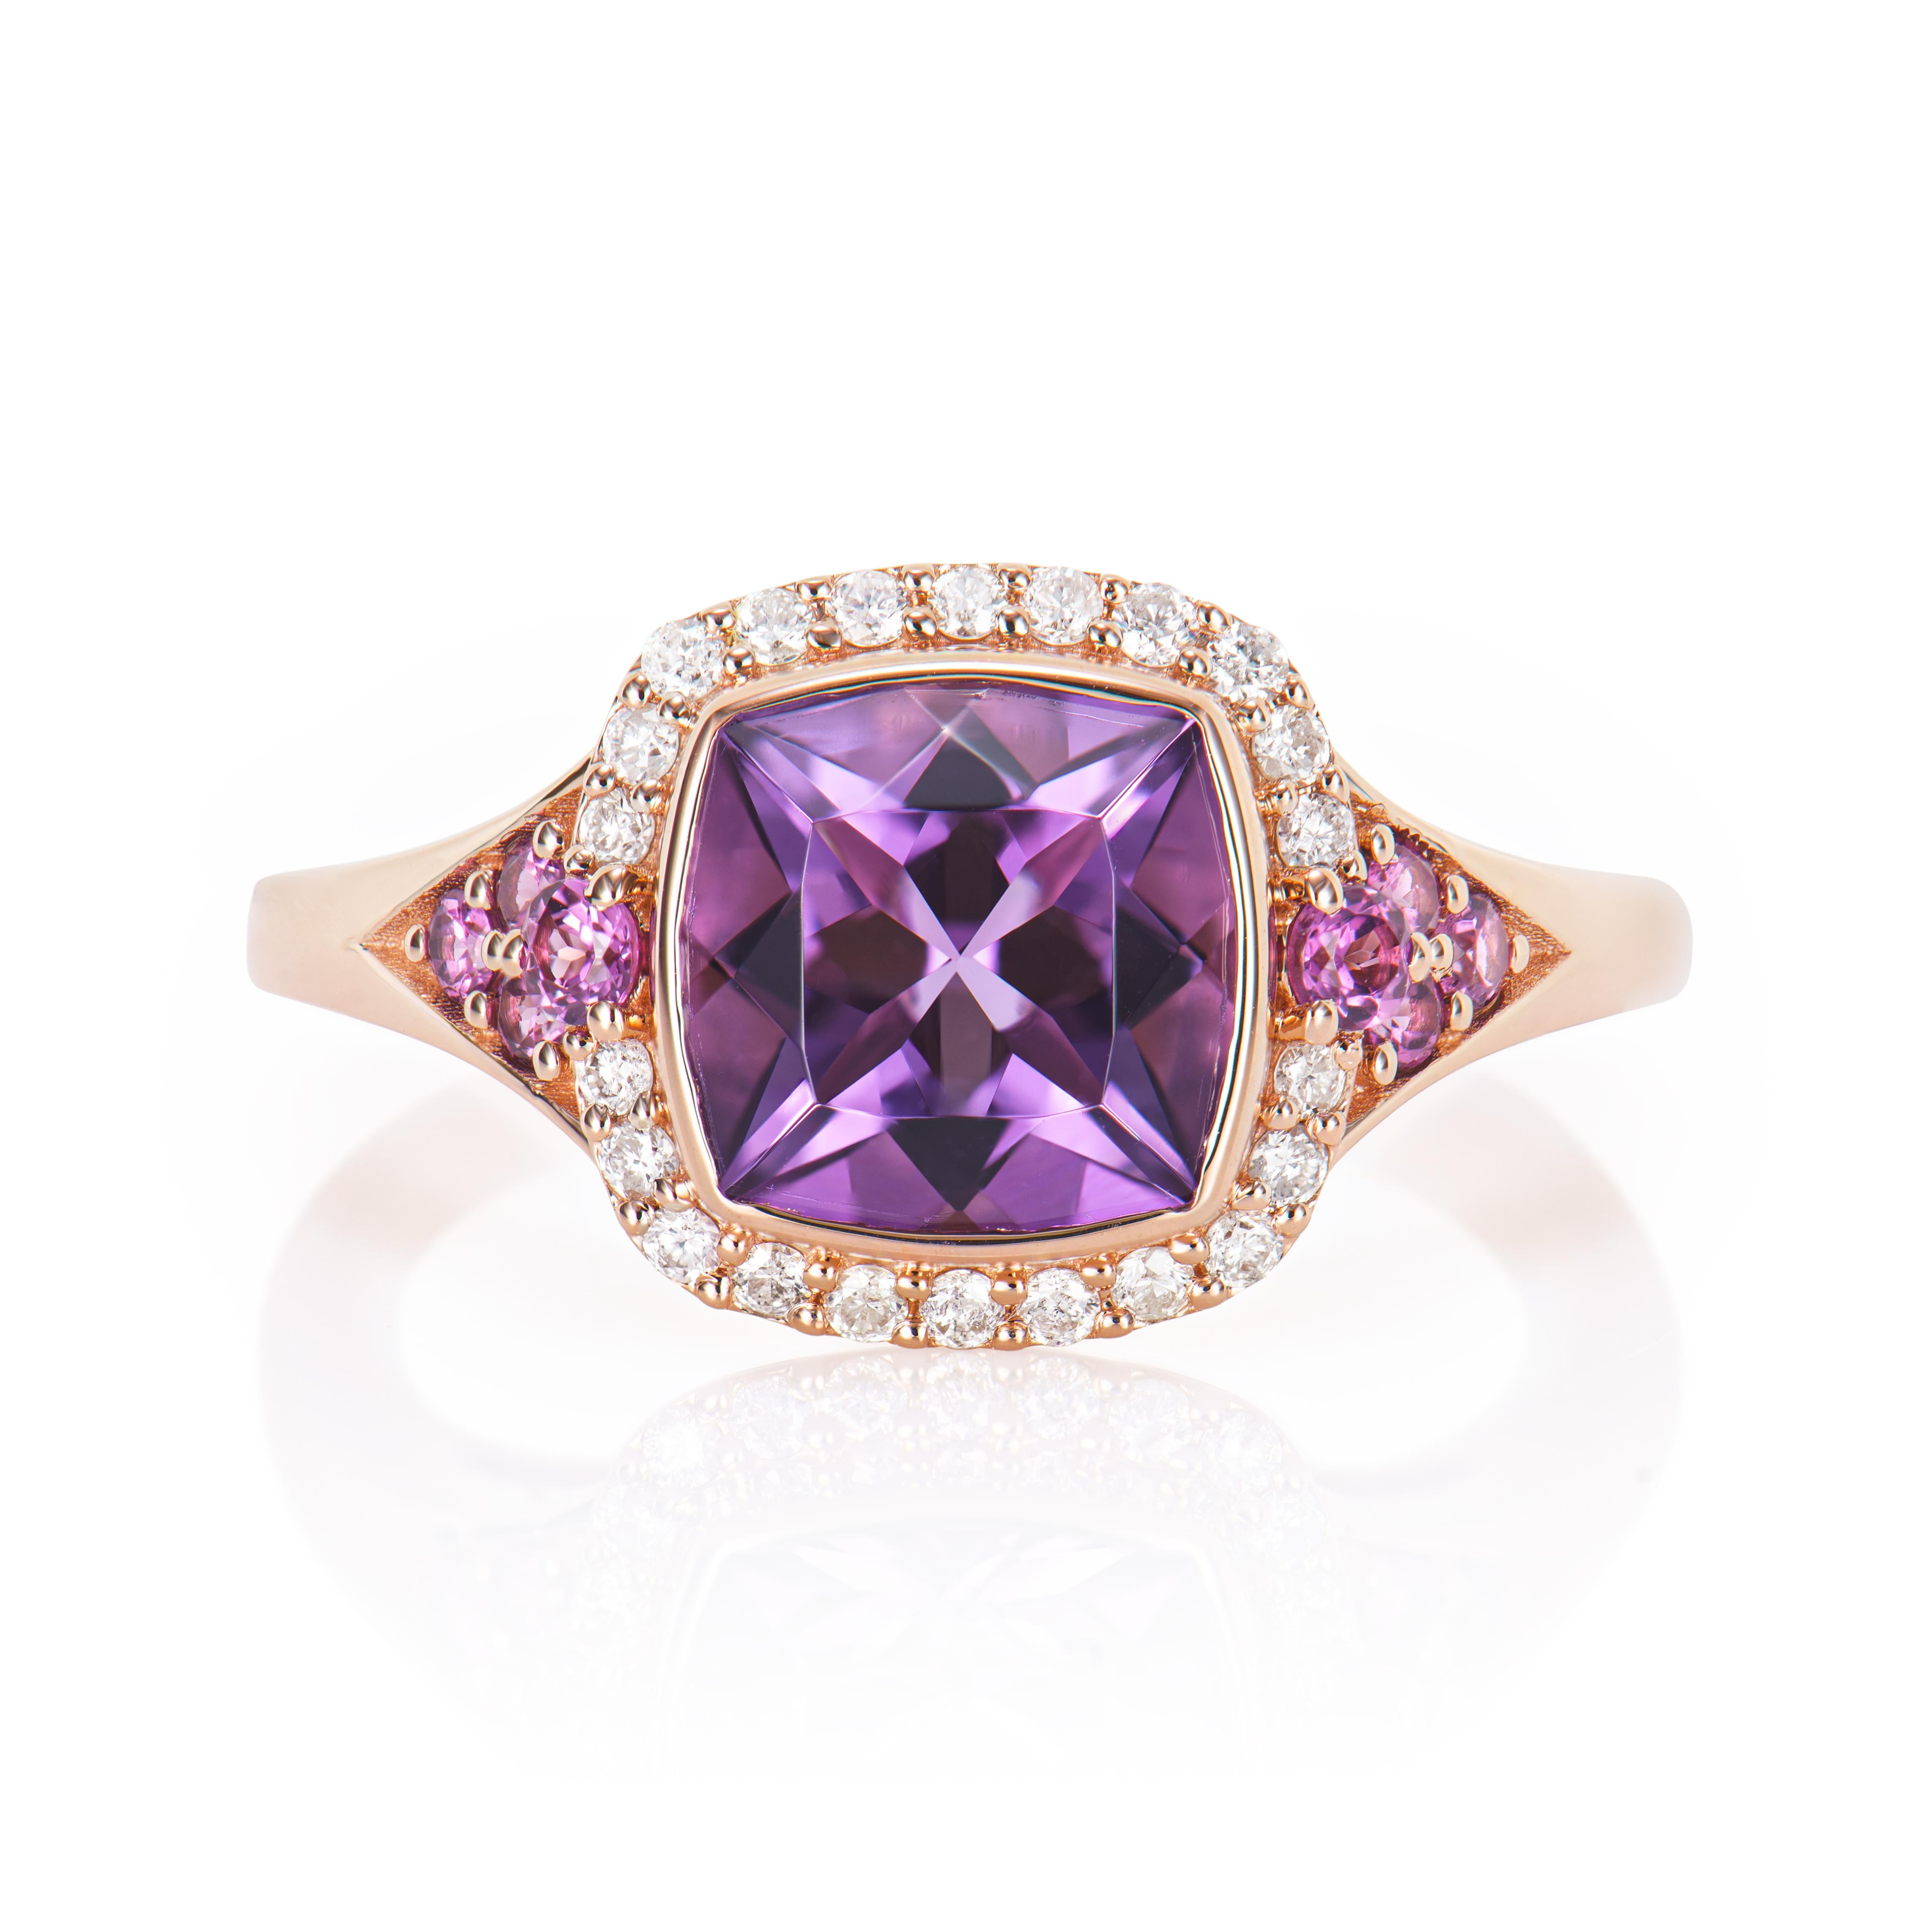 Contemporary 1.22 Carat Amethyst Fancy Ring in 14KRG with Rhodolite and White Diamond.   For Sale